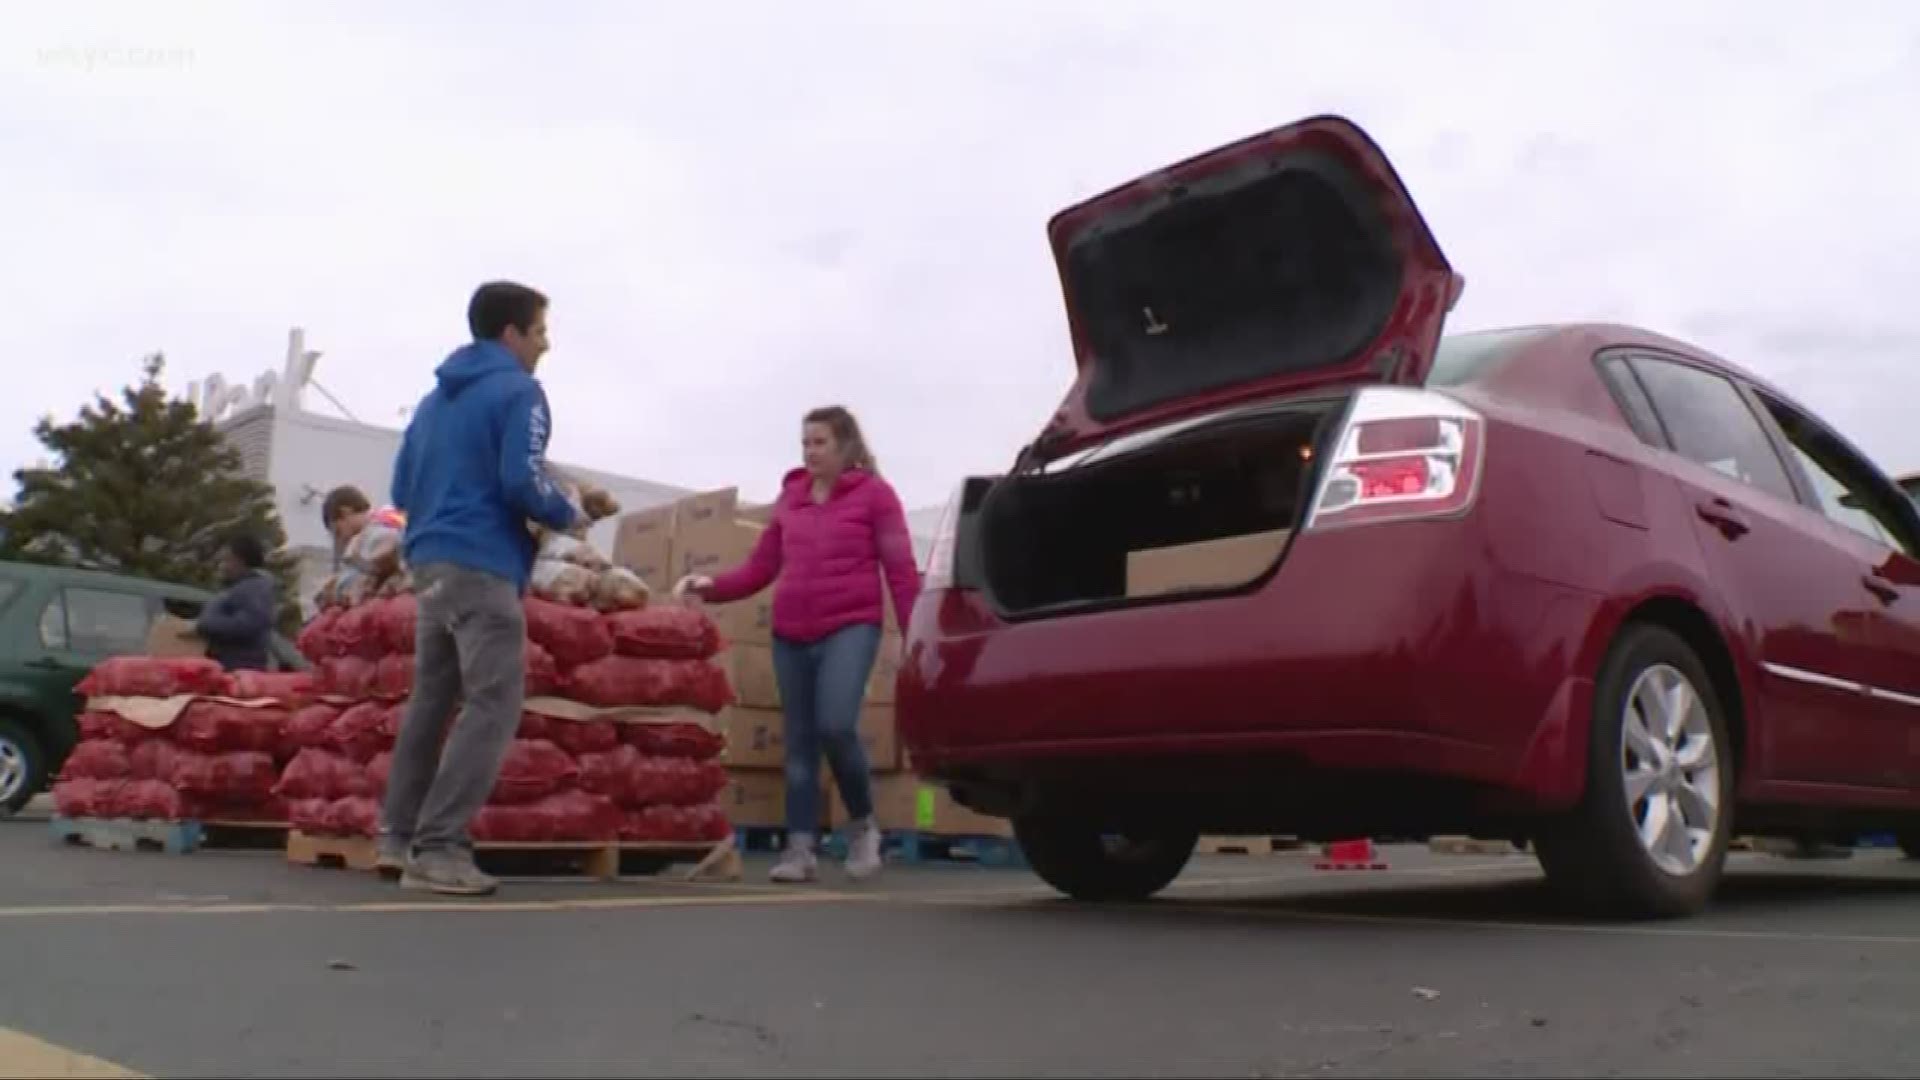 Cars lined up for hours to register and receive boxes of food after coronavirus cuts make life uncertain for some. Dorsena Drakeford reports.